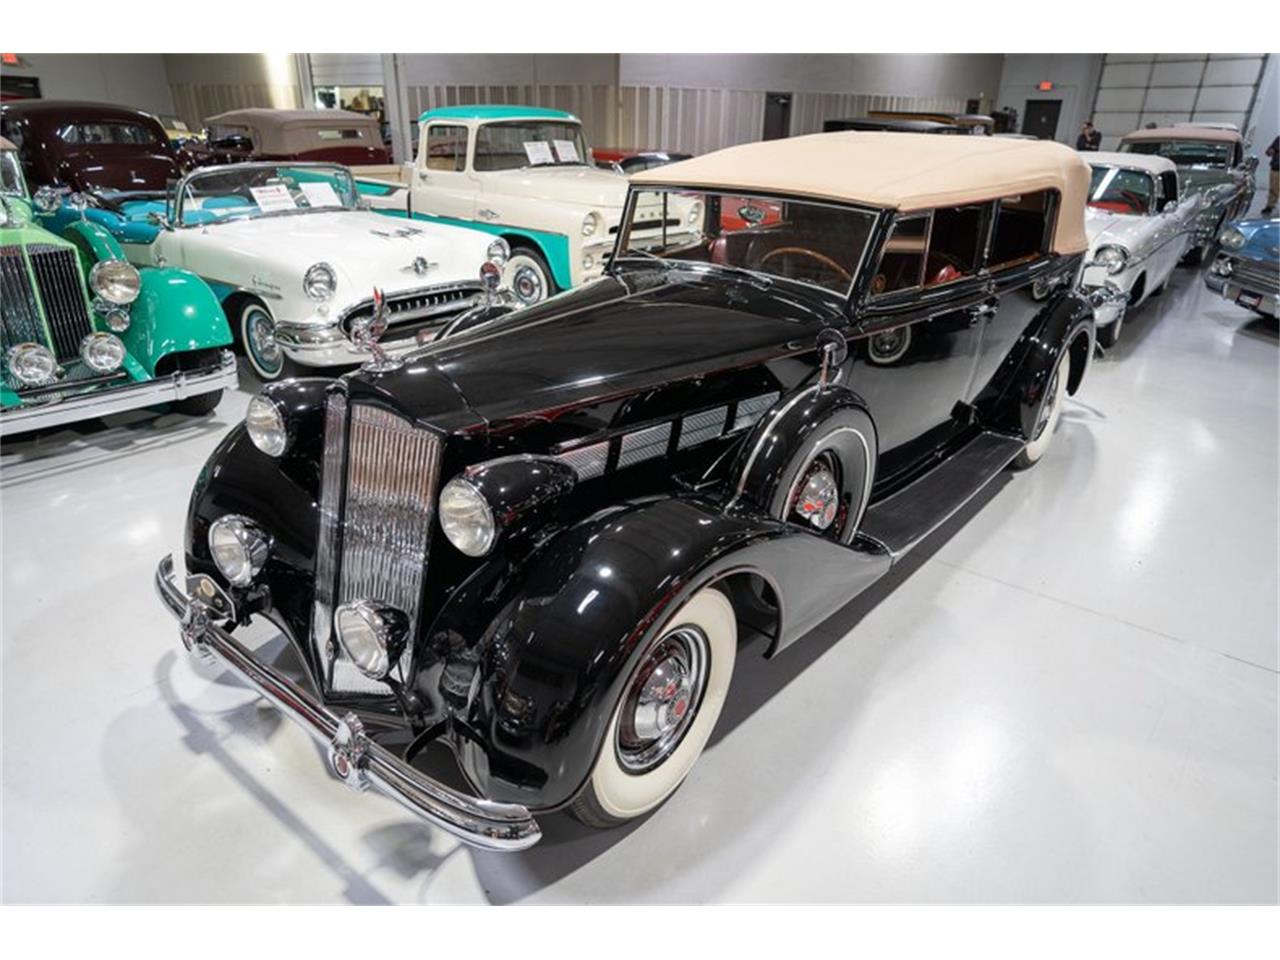 For Sale: 1937 Packard Super Eight in Rogers, Minnesota for sale in Rogers, MN